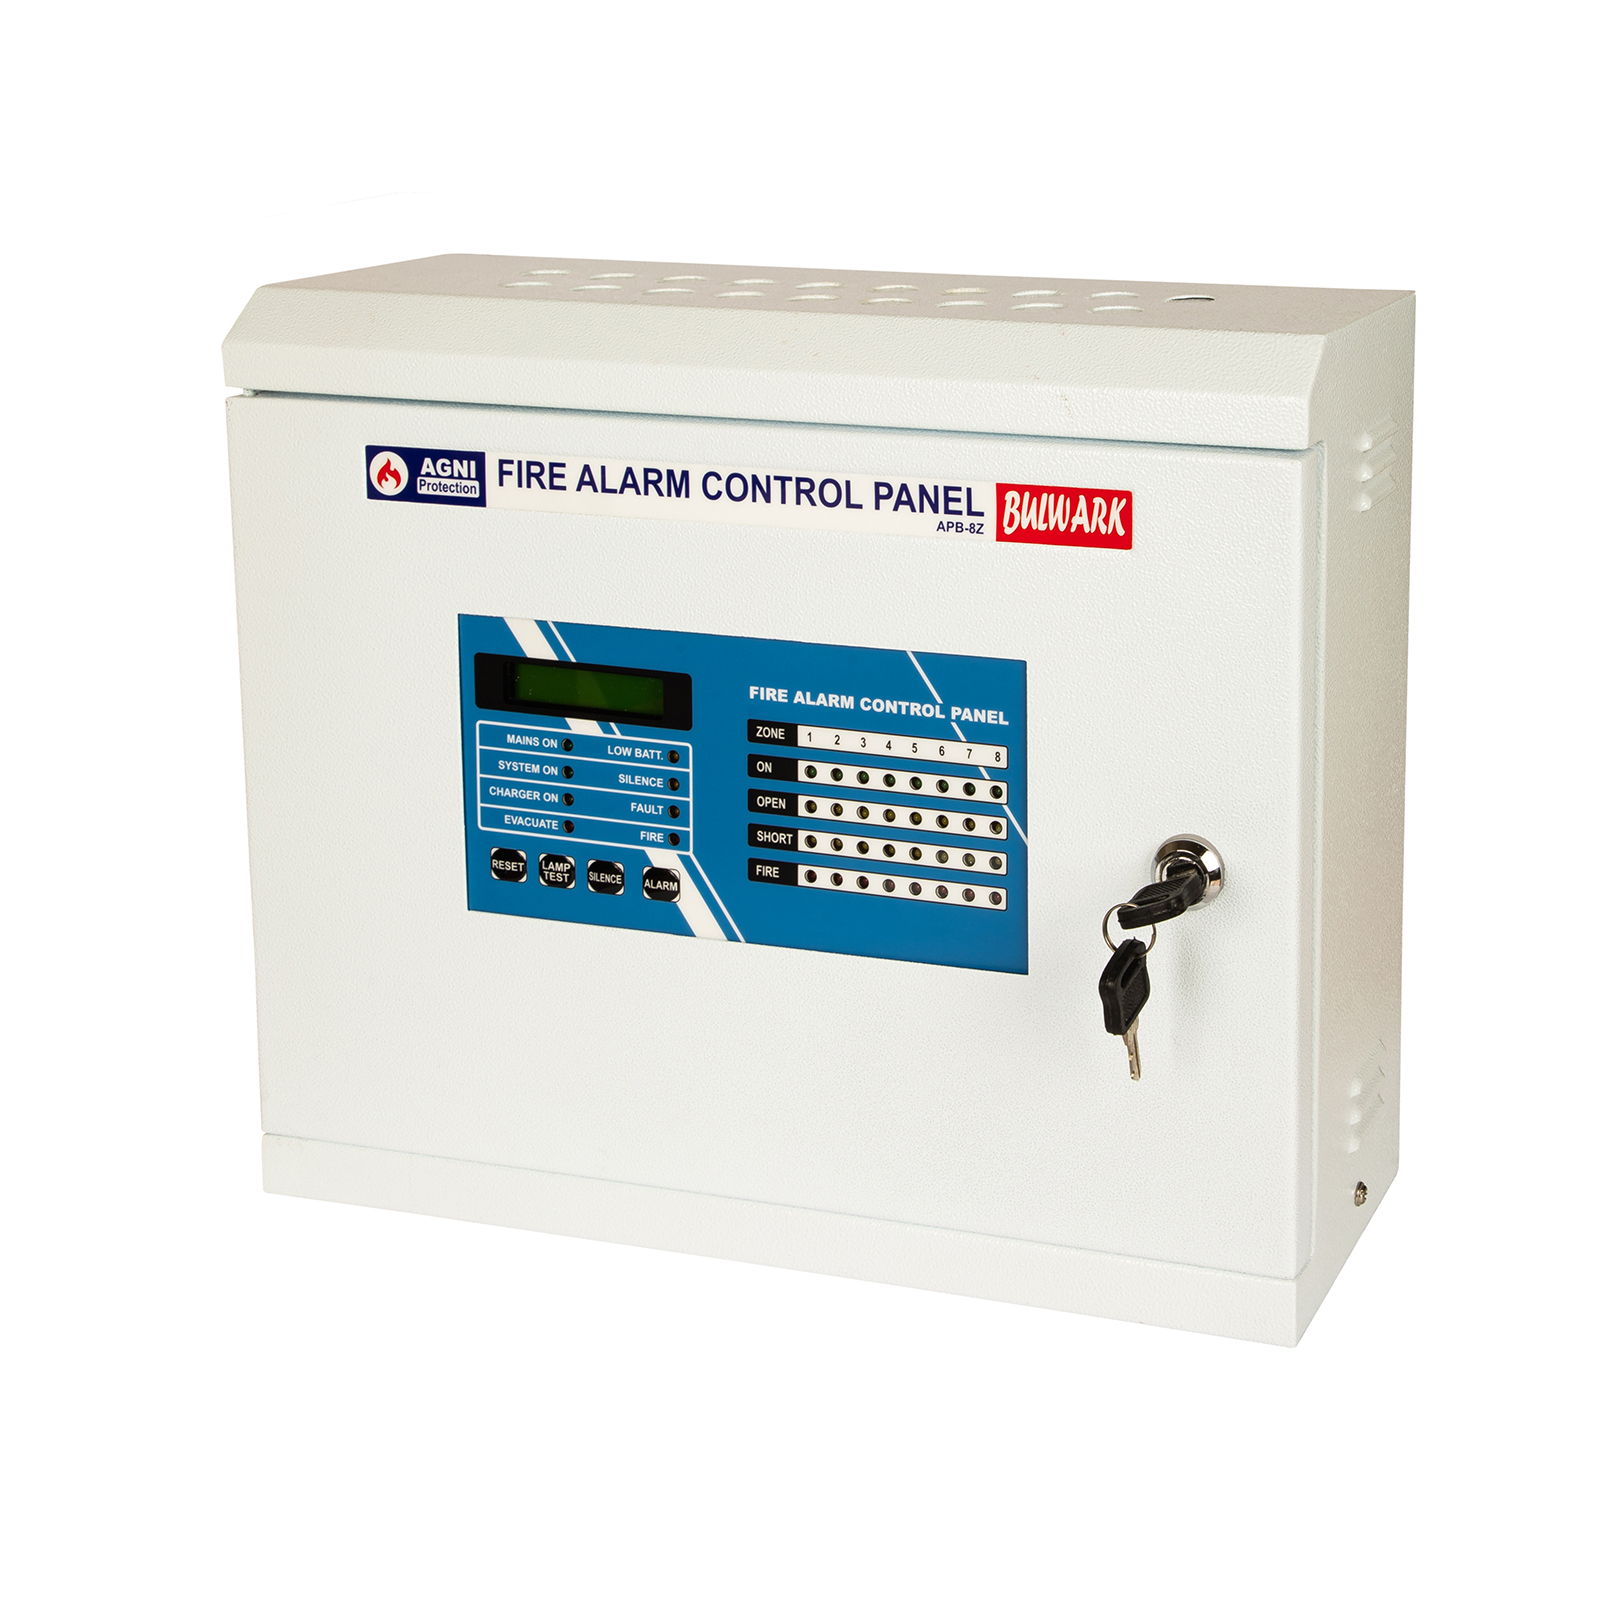 6 ZONE CONVENTIONAL FIRE ALARM PANEL